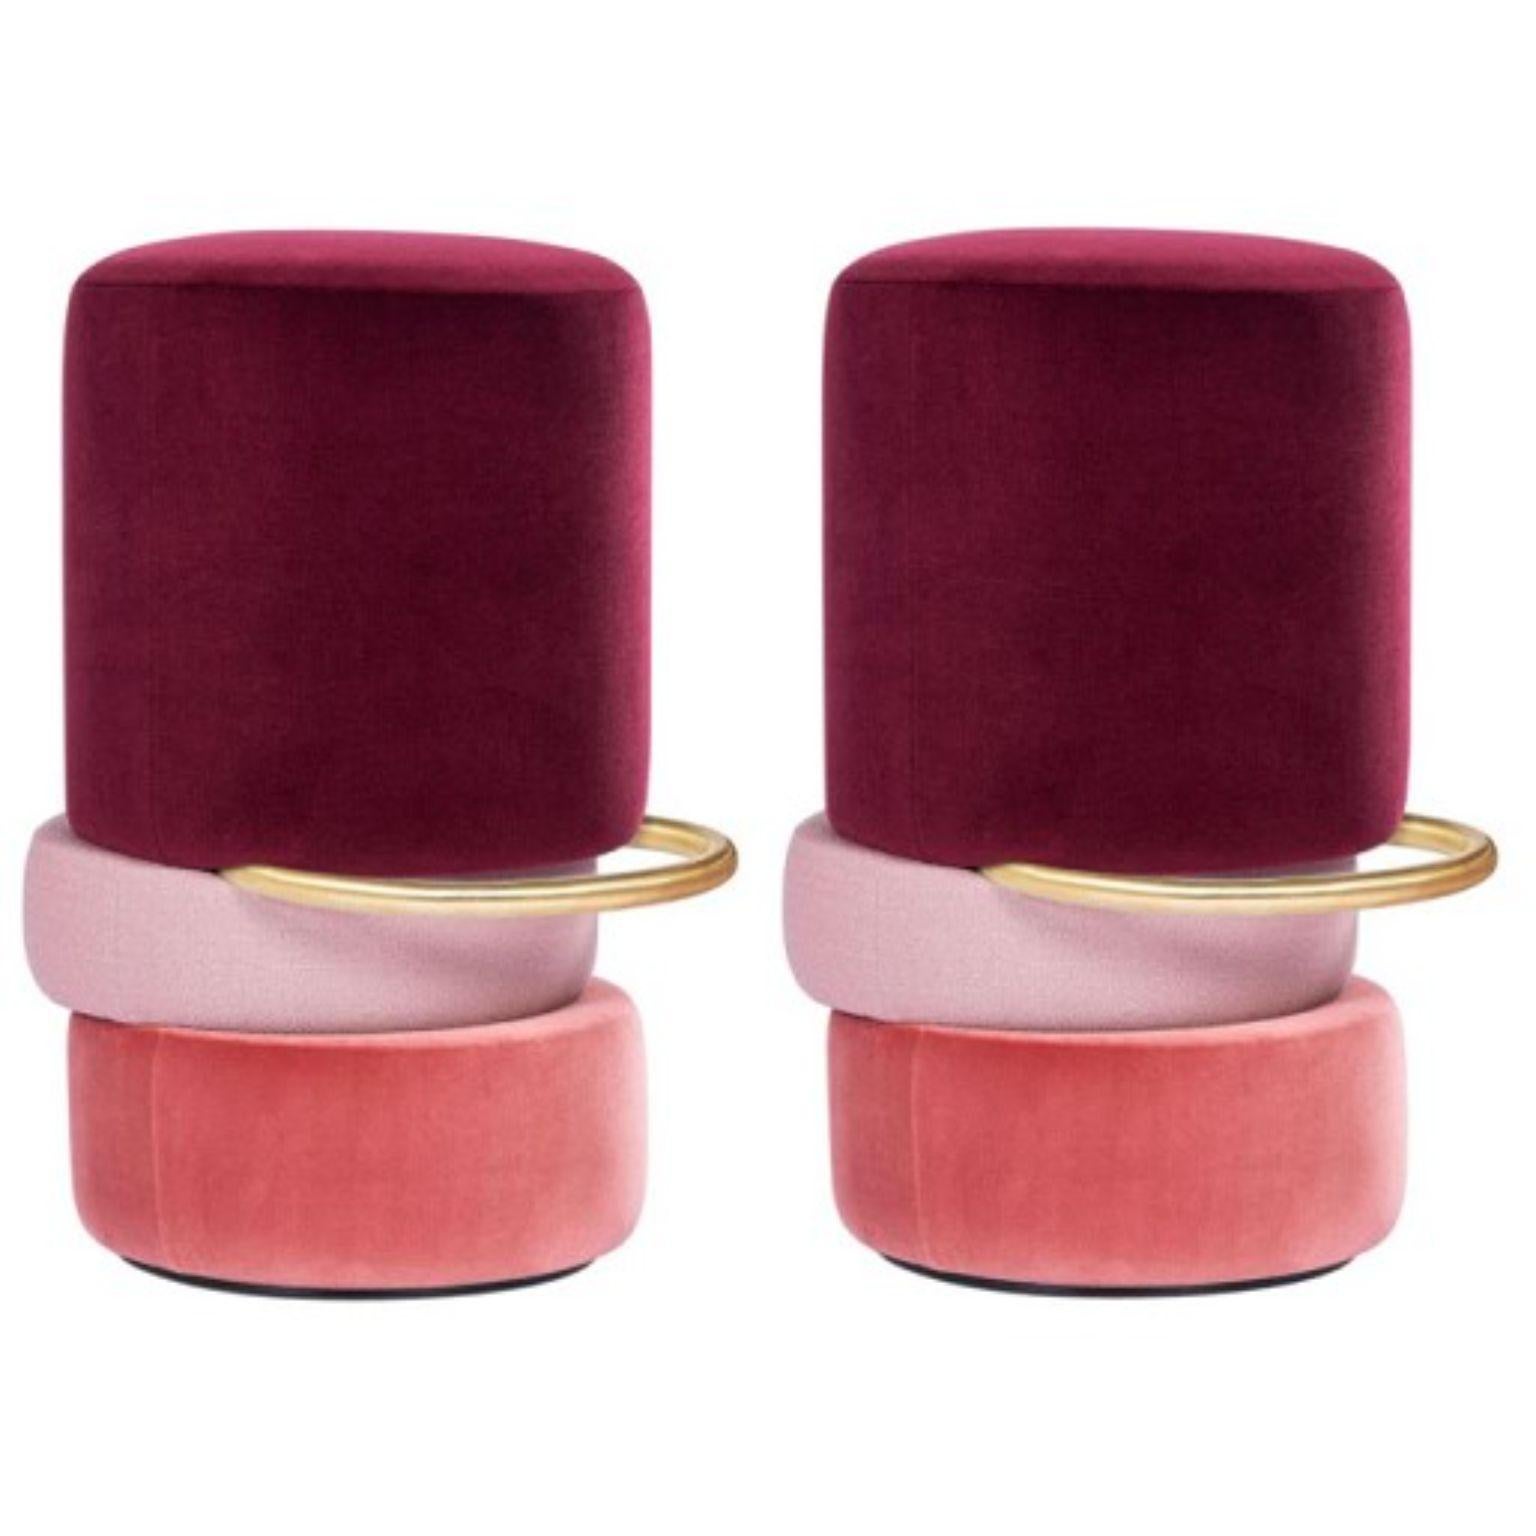 Set of 2 lipstick bar stools by Royal Stranger
Dimensions: 188 x 49 x 91 cm
Materials: A matte body and a matte pattern over a glossy surface, elevated by a brass presence.

With a playful and geometrical form, the lipstick bar stool will make